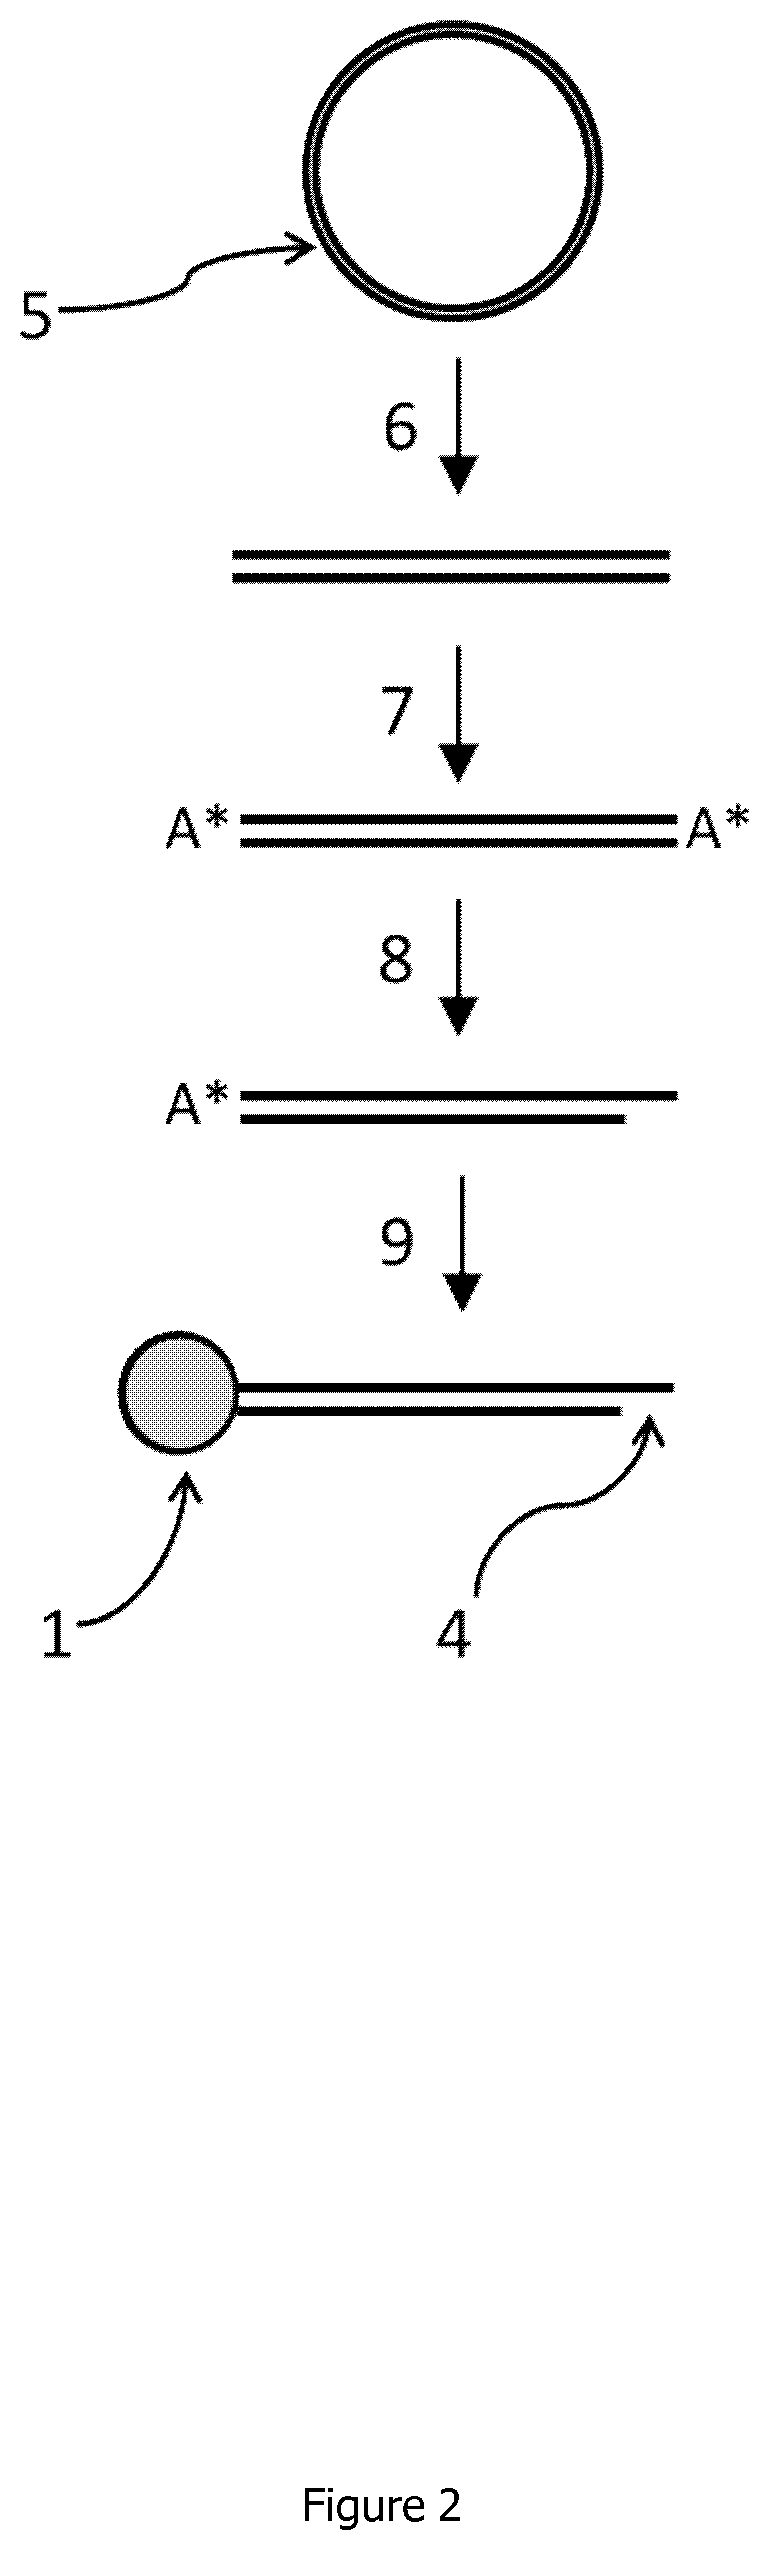 Linear double stranded DNA coupled to a single support or a tag and methods for producing said linear double stranded DNA